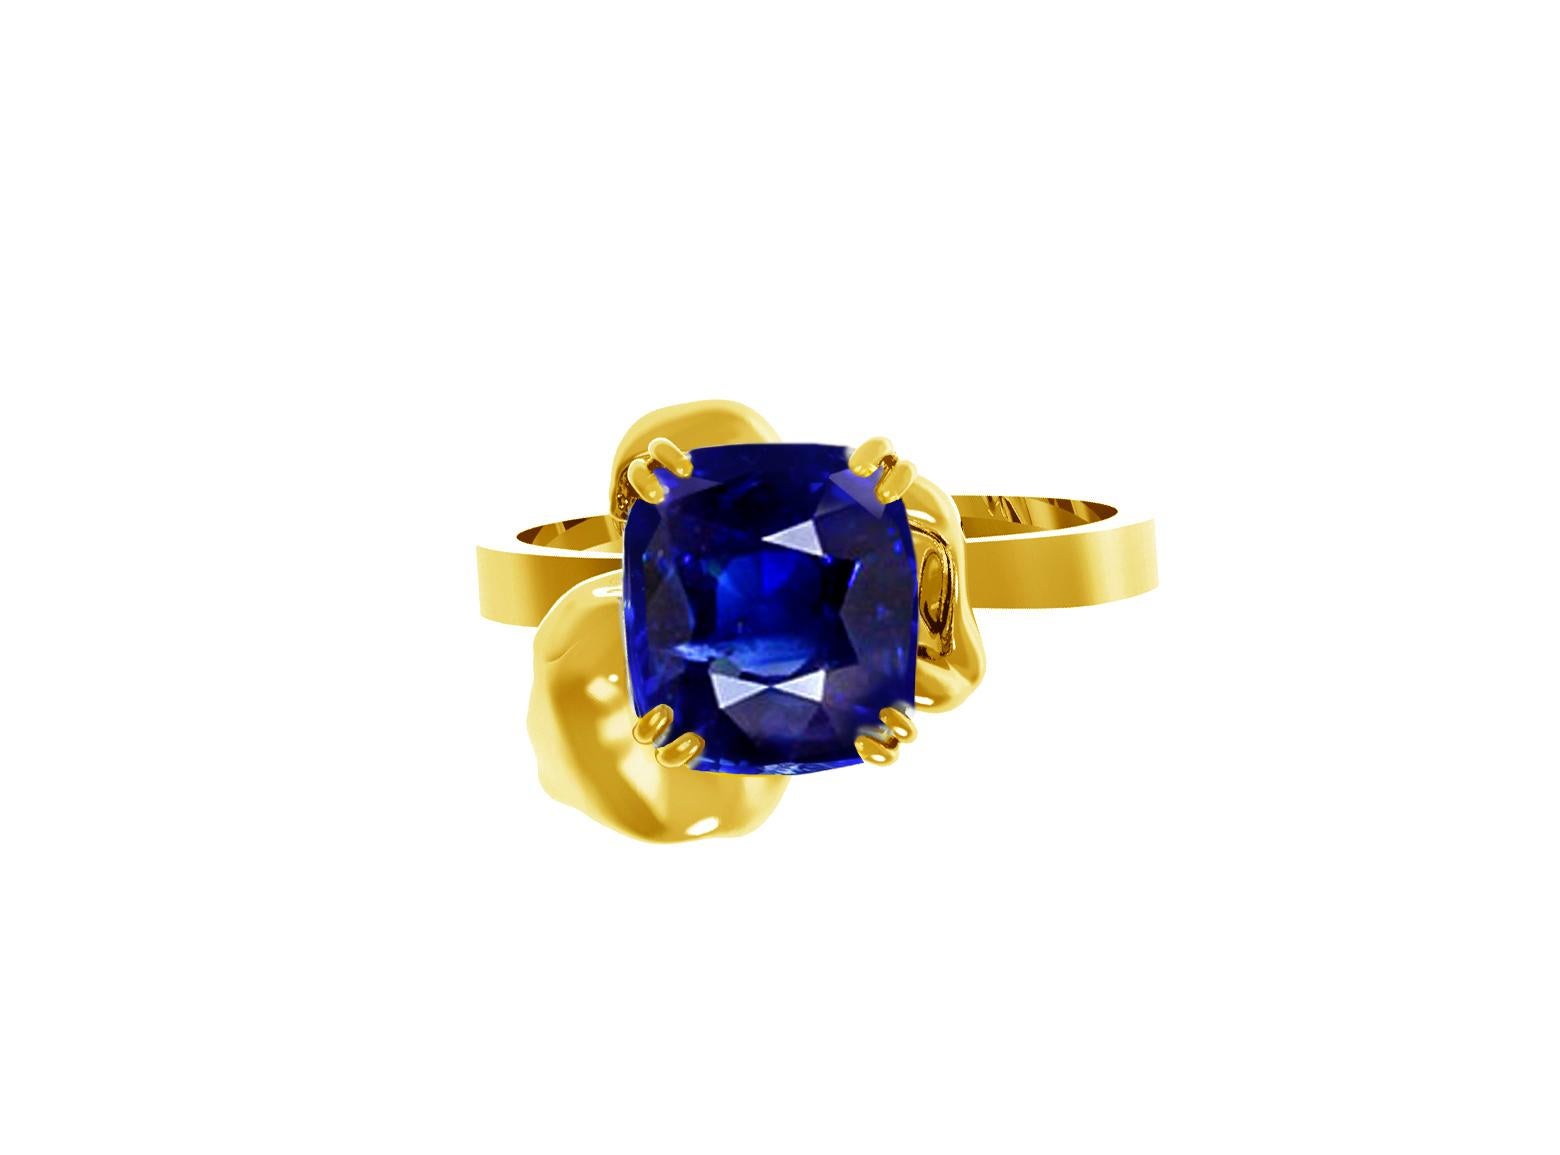 Eighteen Karat Gold Contemporary Cocktail Ring with Dark Blue Cushion Sapphire For Sale 4